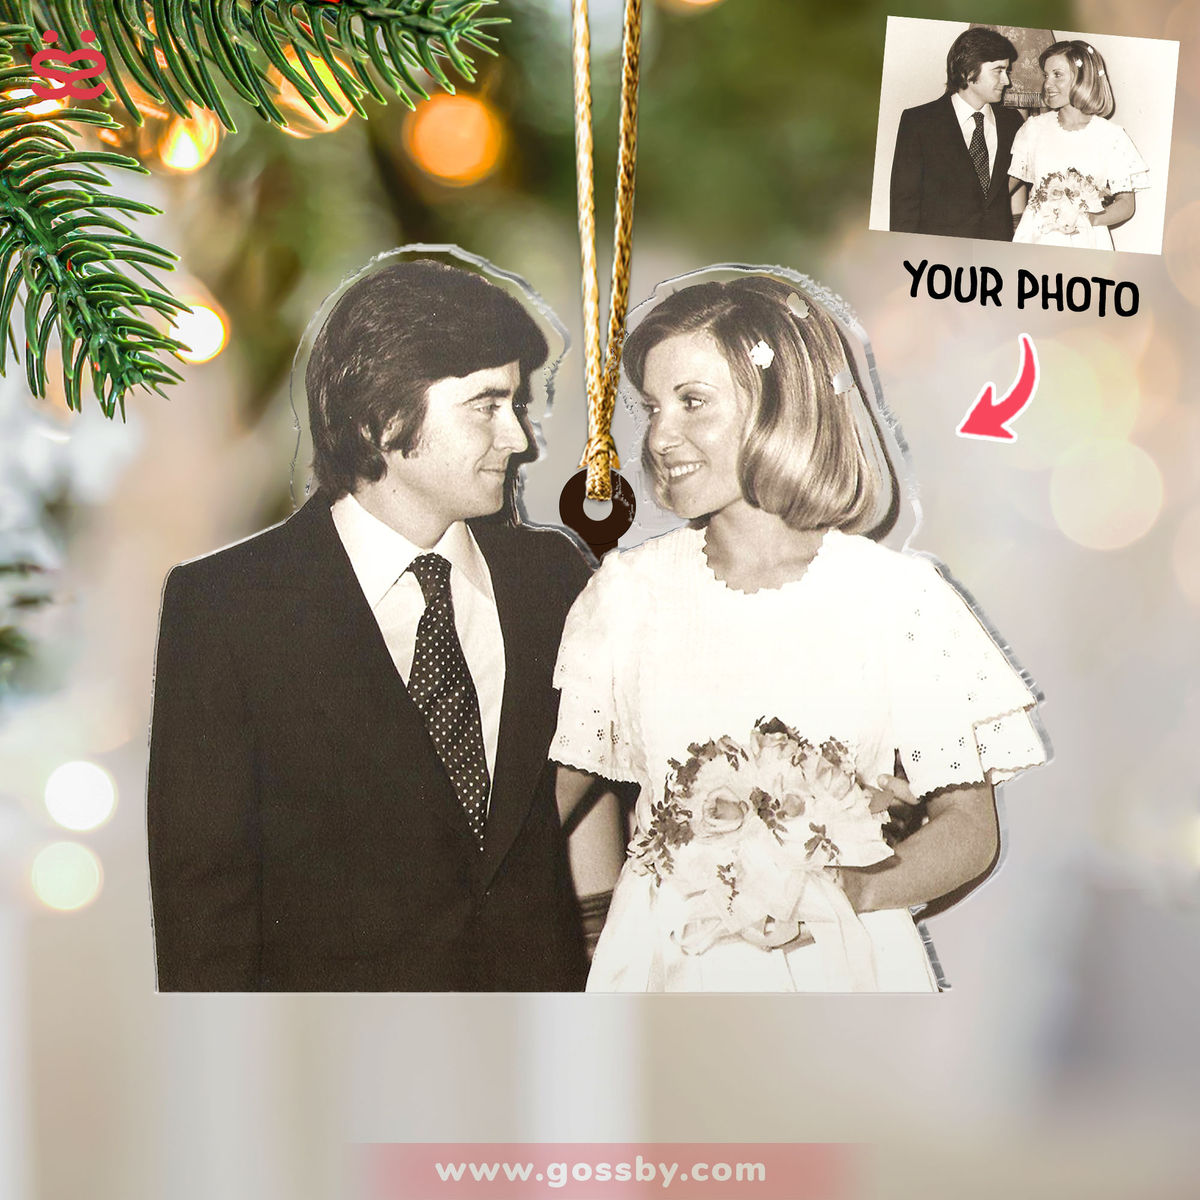 Customized Your Photo Ornaments - Gift for Women - Christmas Gift - Couple Photo Gifts, Christmas Gifts for Couple